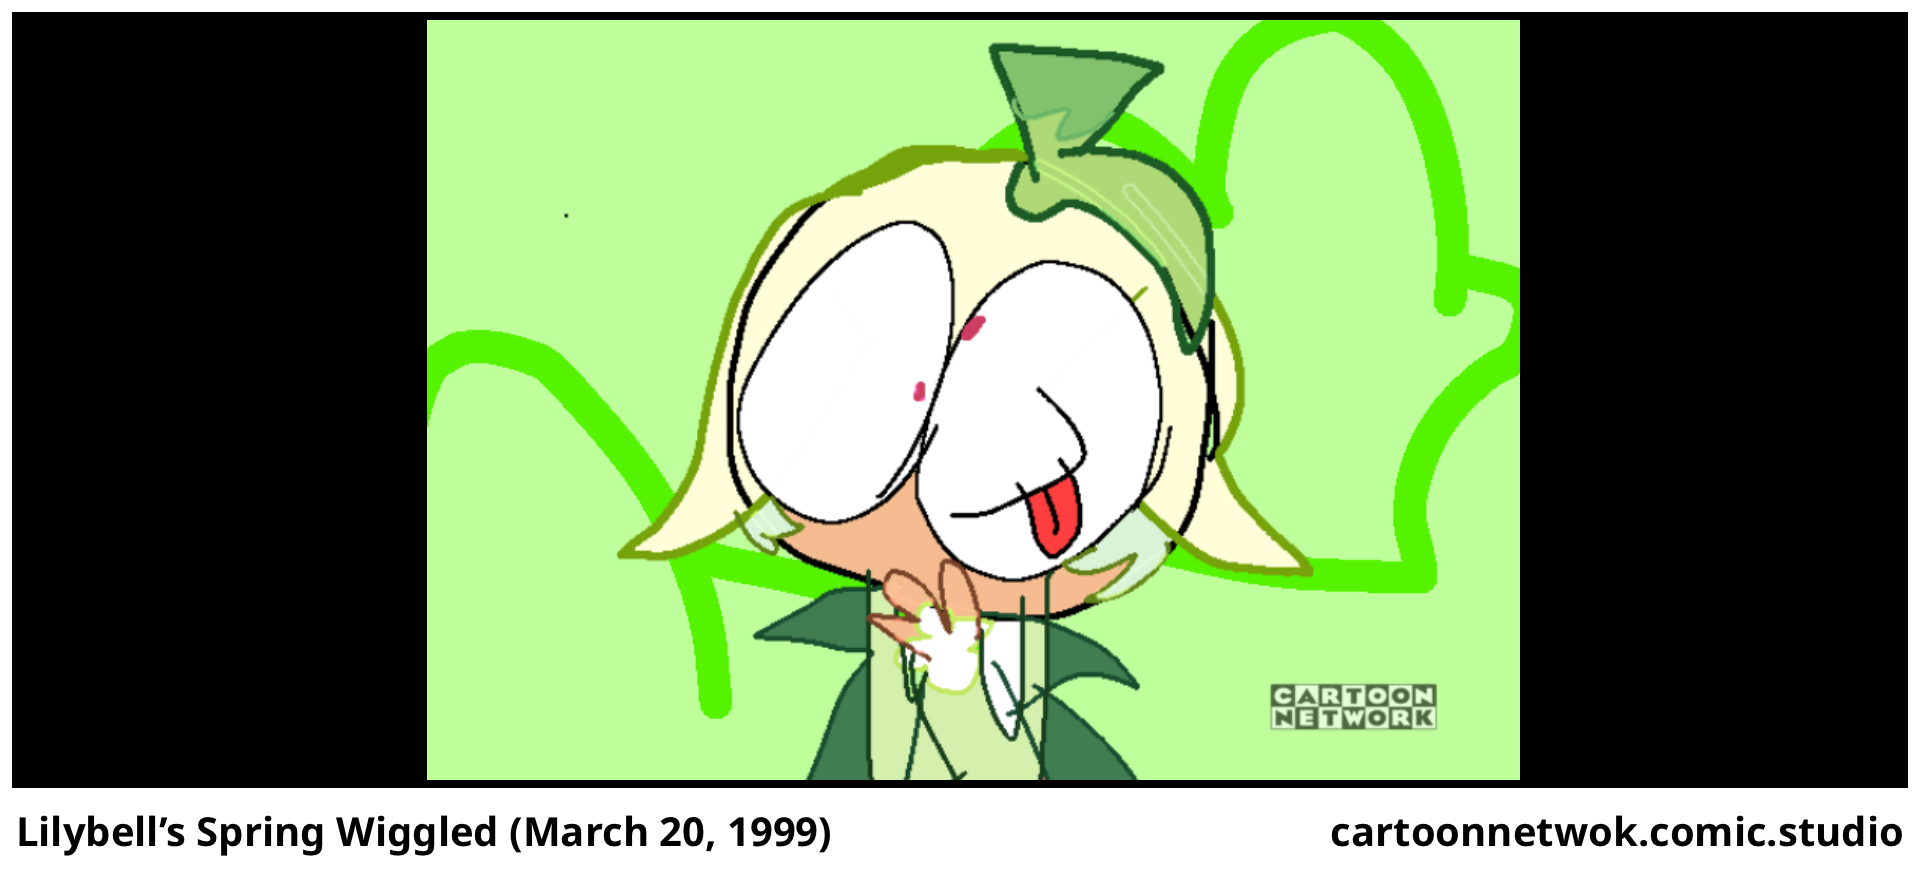 Lilybell’s Spring Wiggled (March 20, 1999)